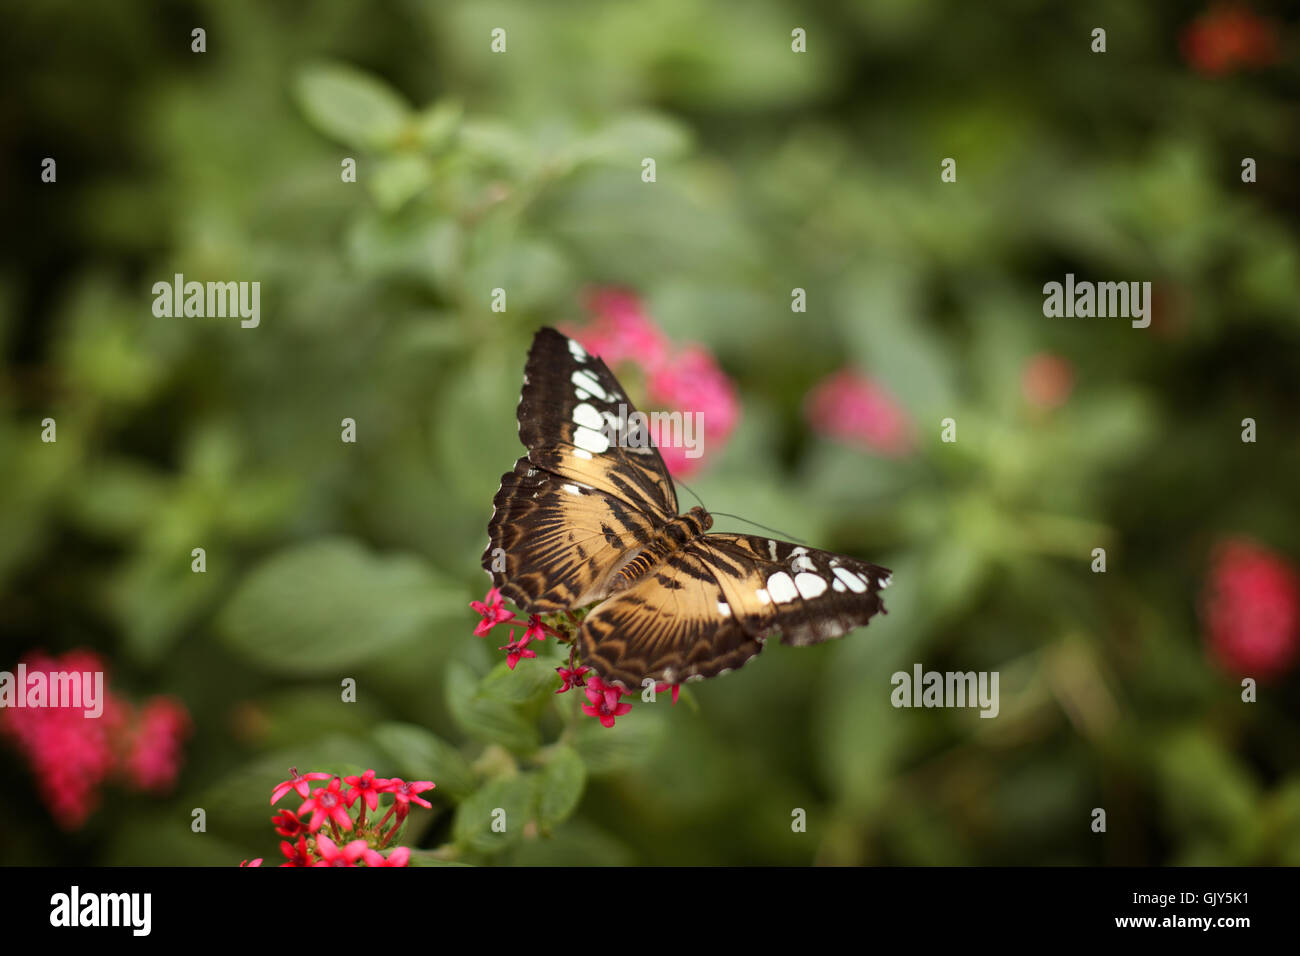 A beautiful brown clipper butterfly that has just landed on a plant with pink flower blossoms. Stock Photo